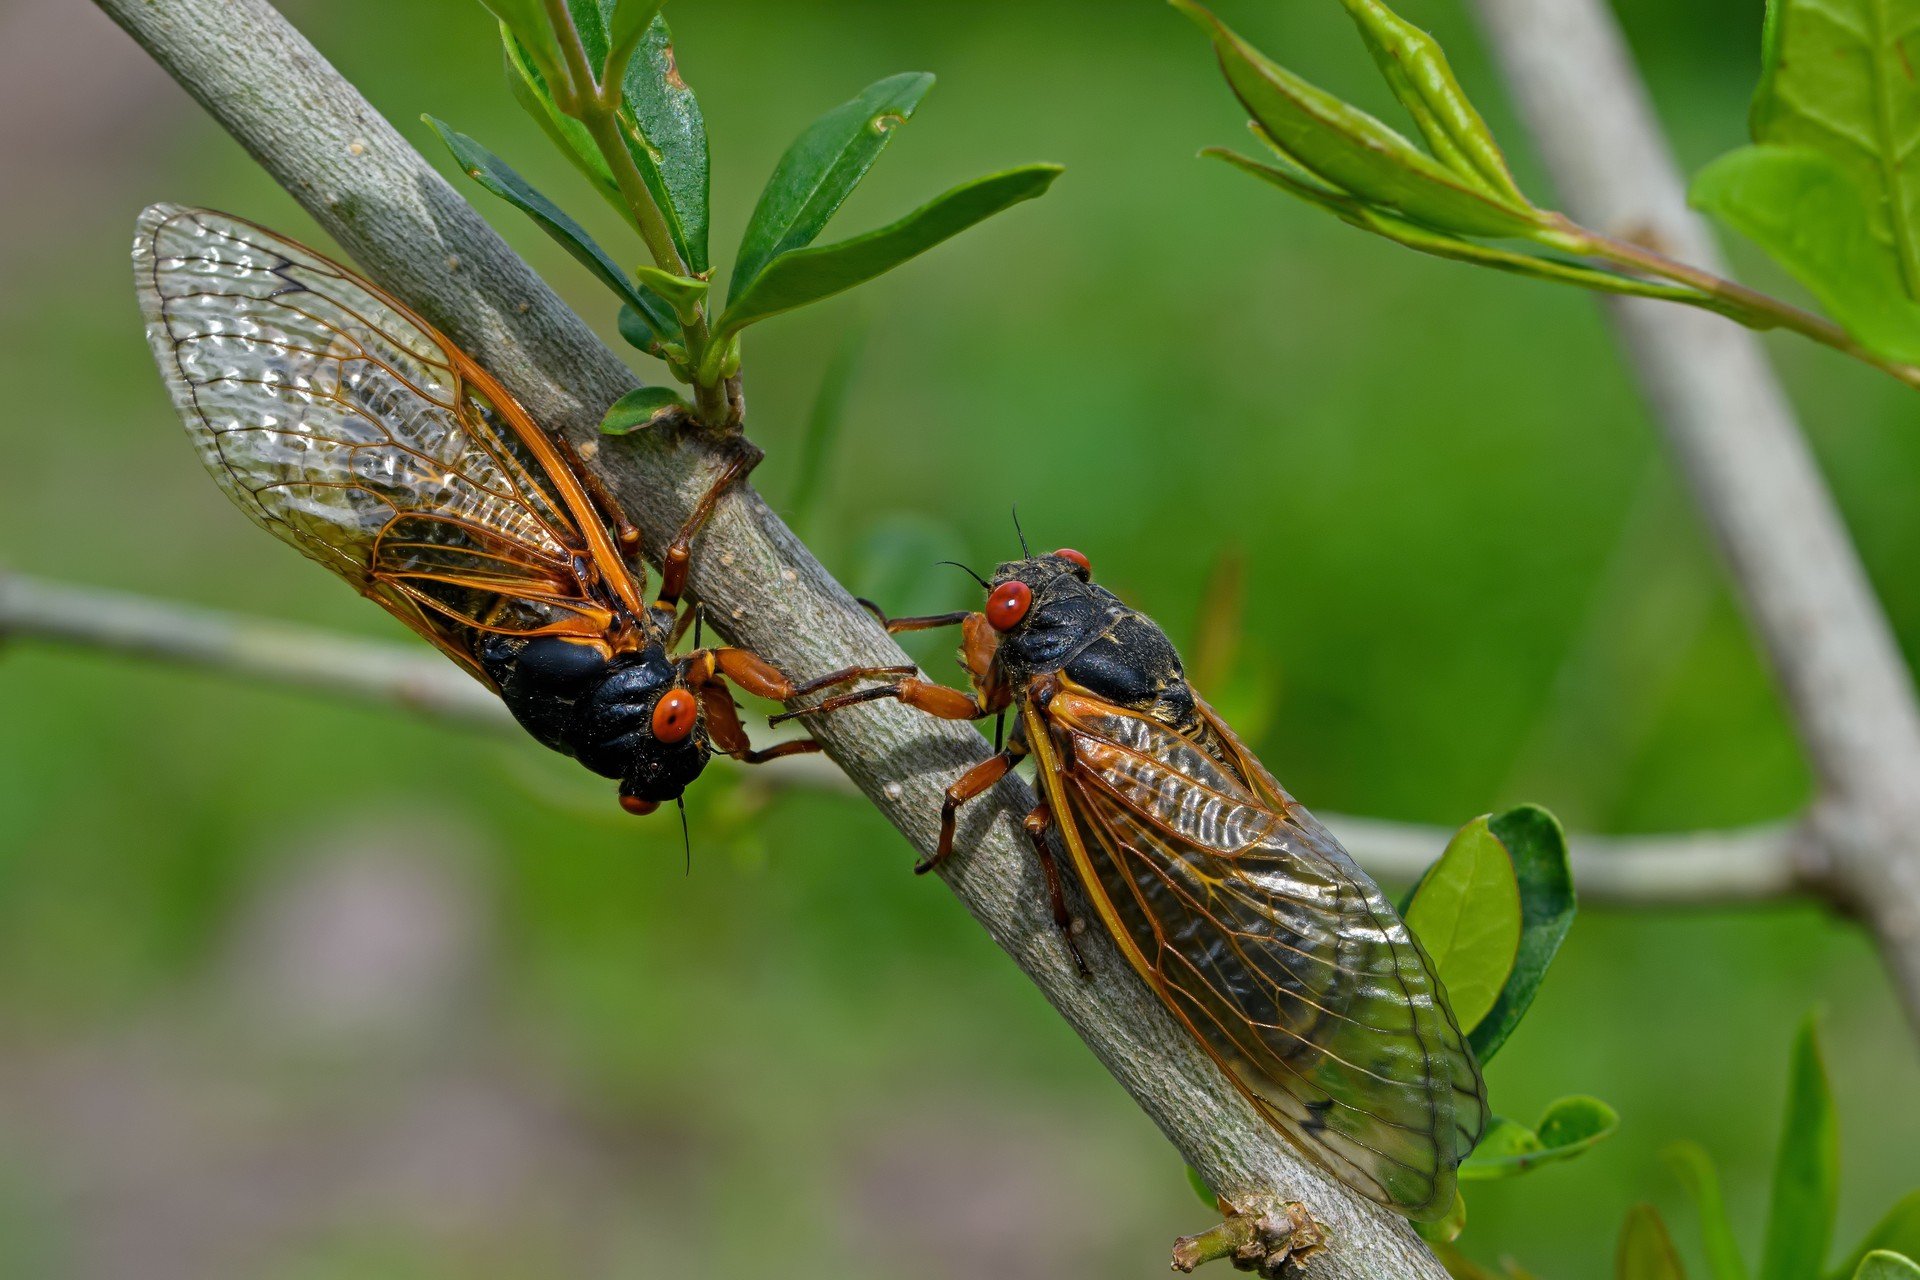 Two periodical cicadas, with black bodies and red eyes, face each other on a tree branch, with green foliage in the background.